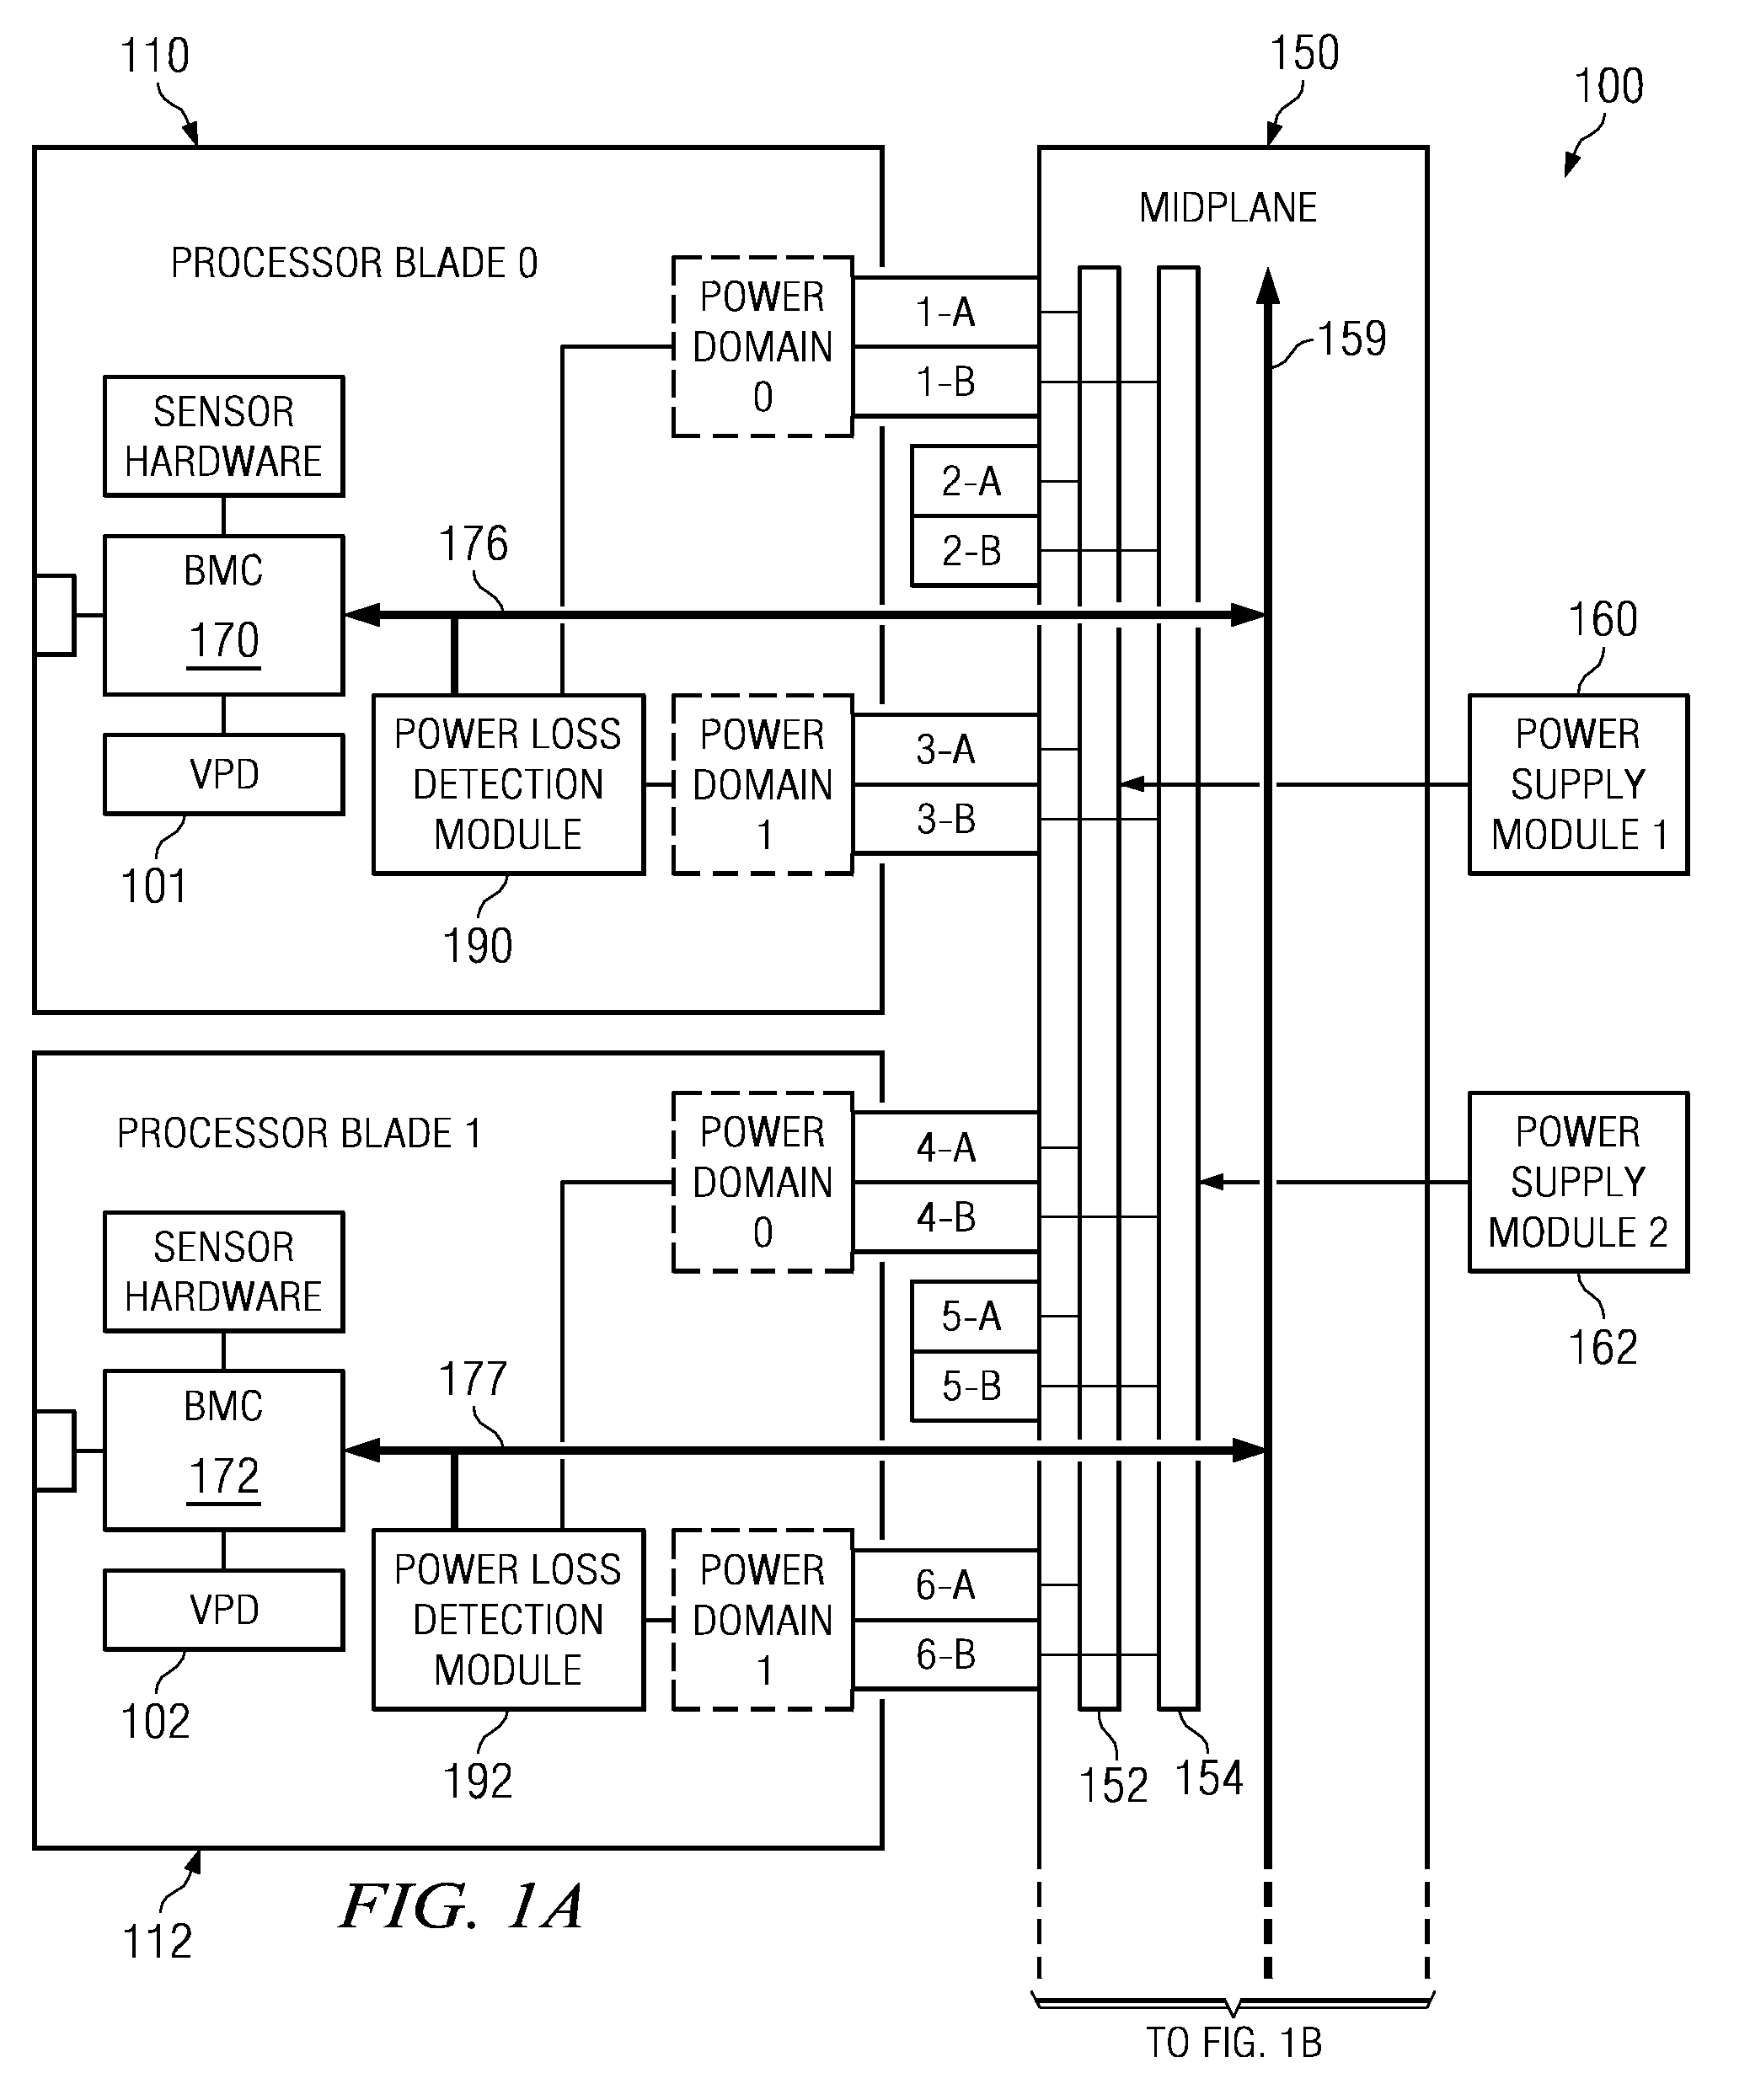 Thresholding system power loss notifications in a data processing system based on vital product data